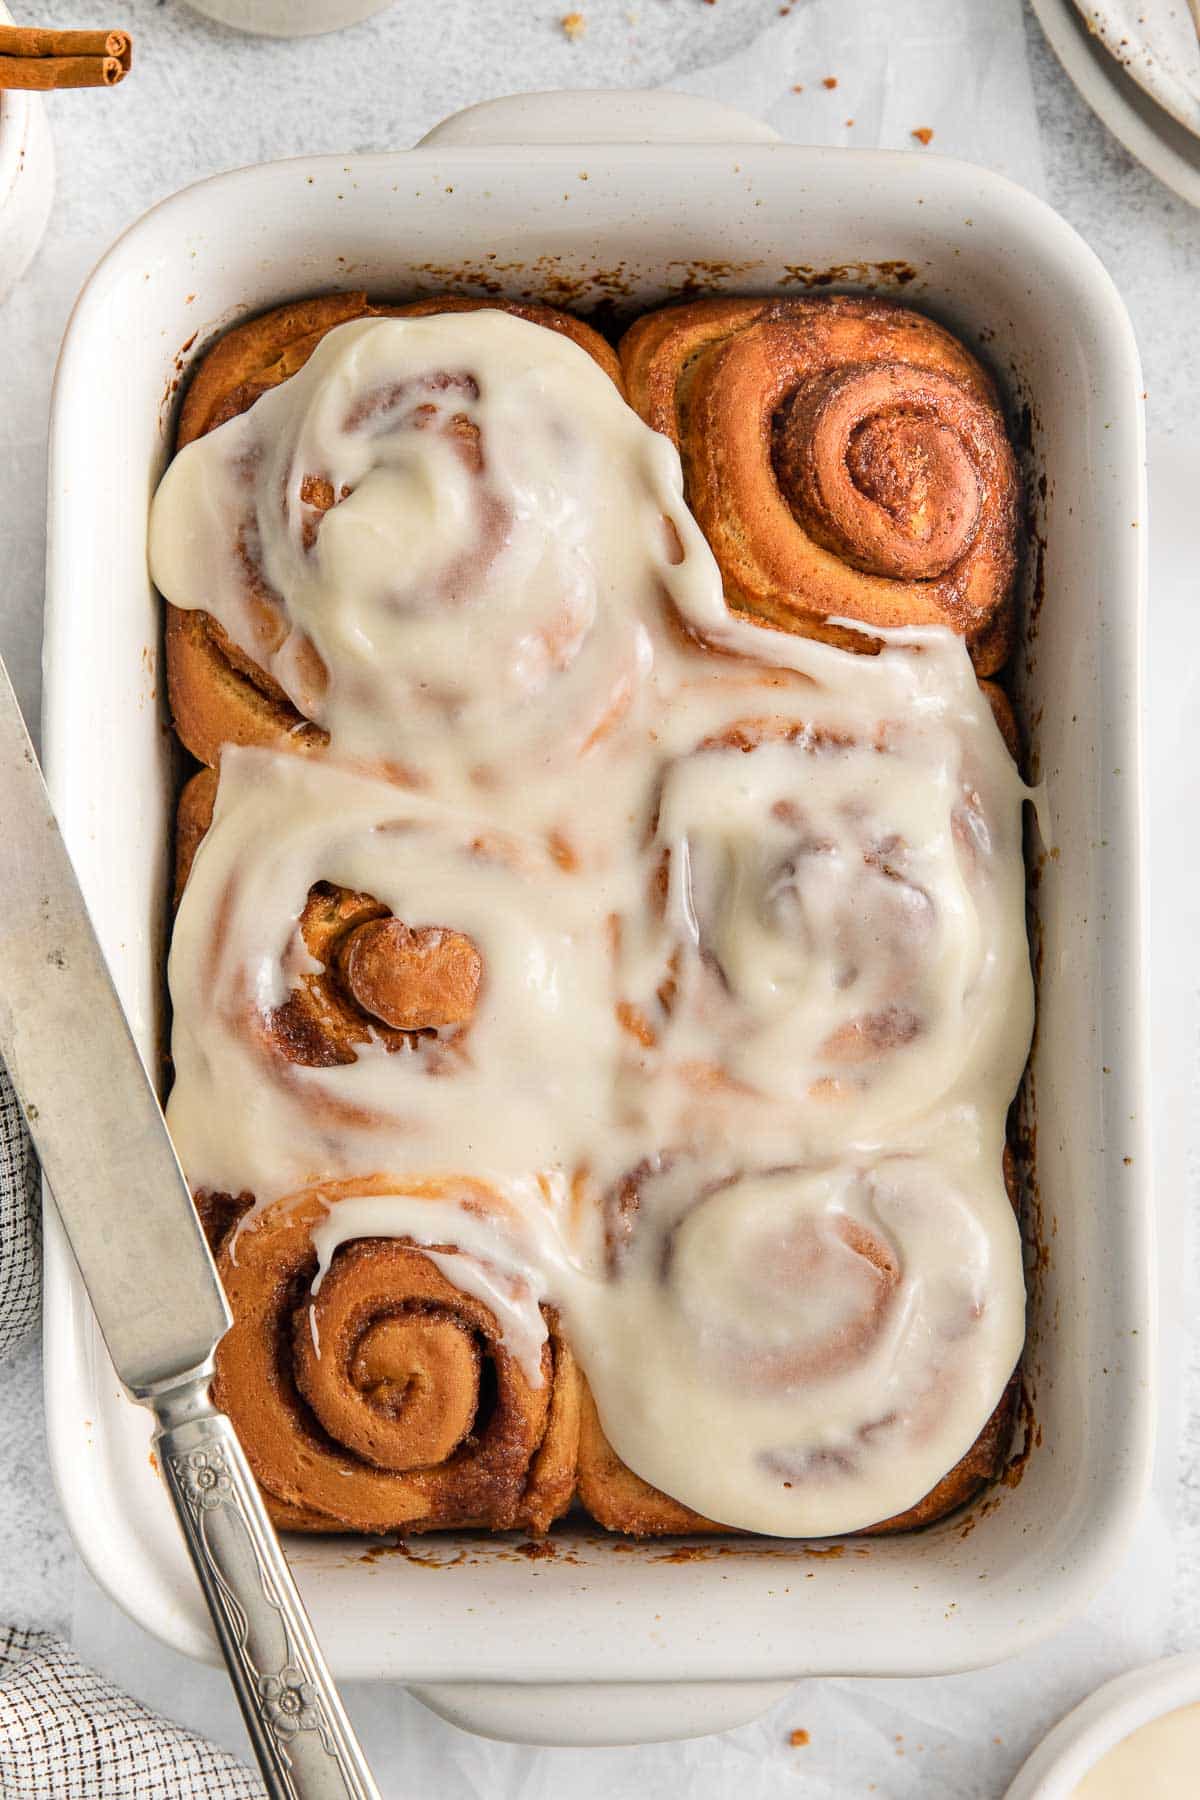 rectangle baking dish with six cinnamon rolls with icing on top.